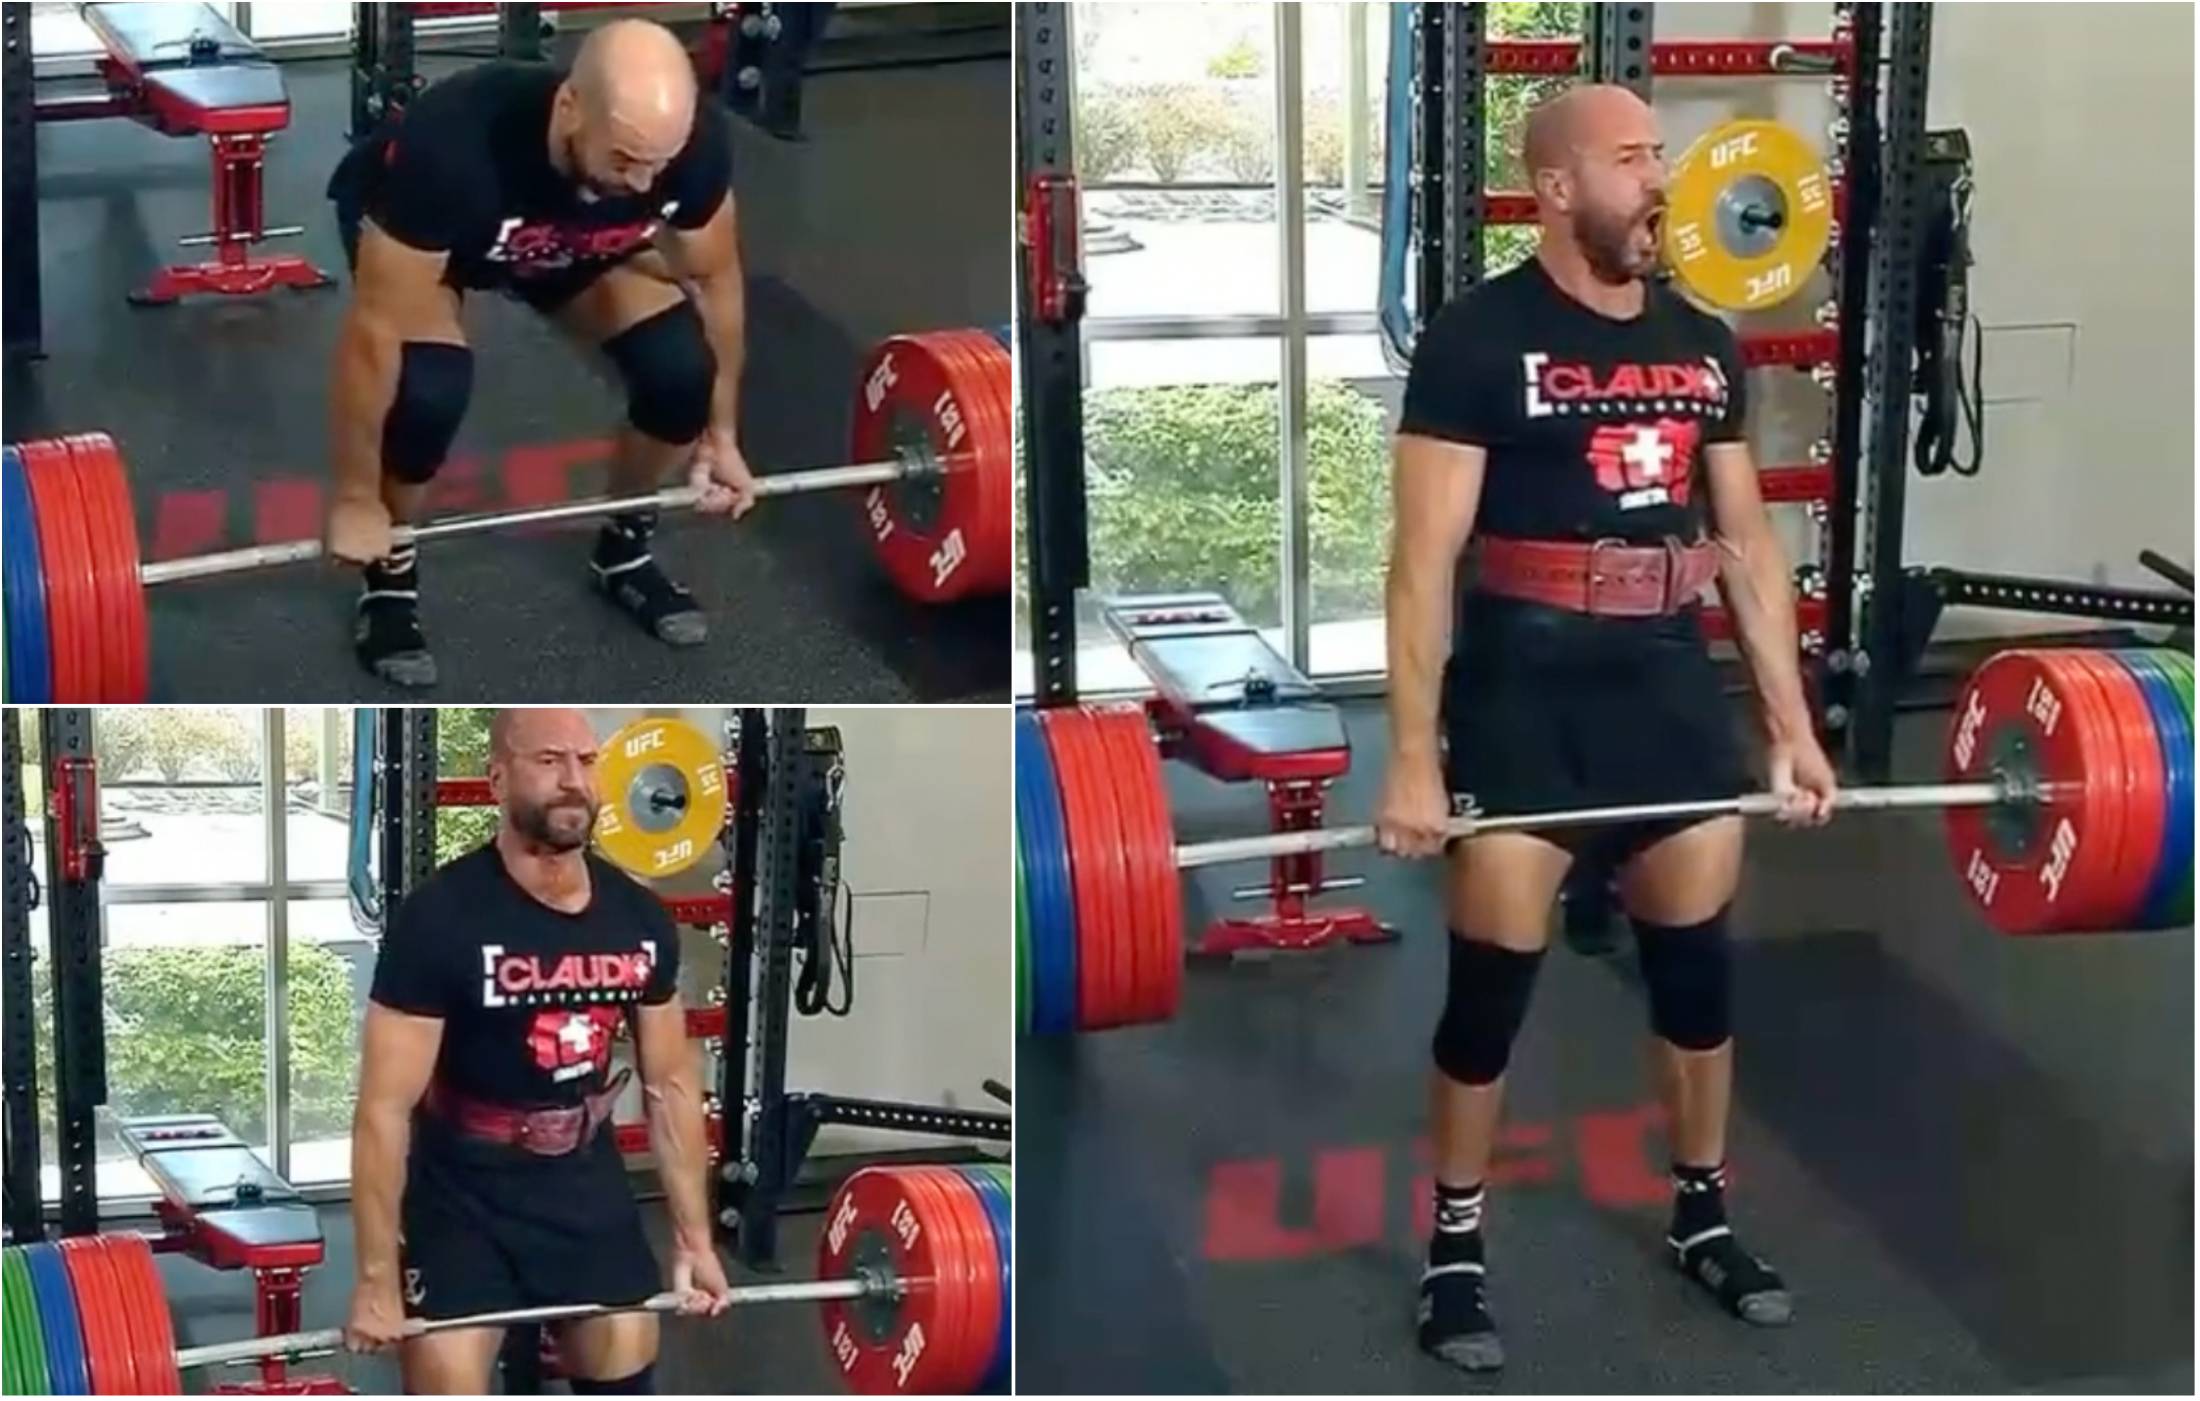 Cesaro casually deadlifting 500lbs is genuinely insane